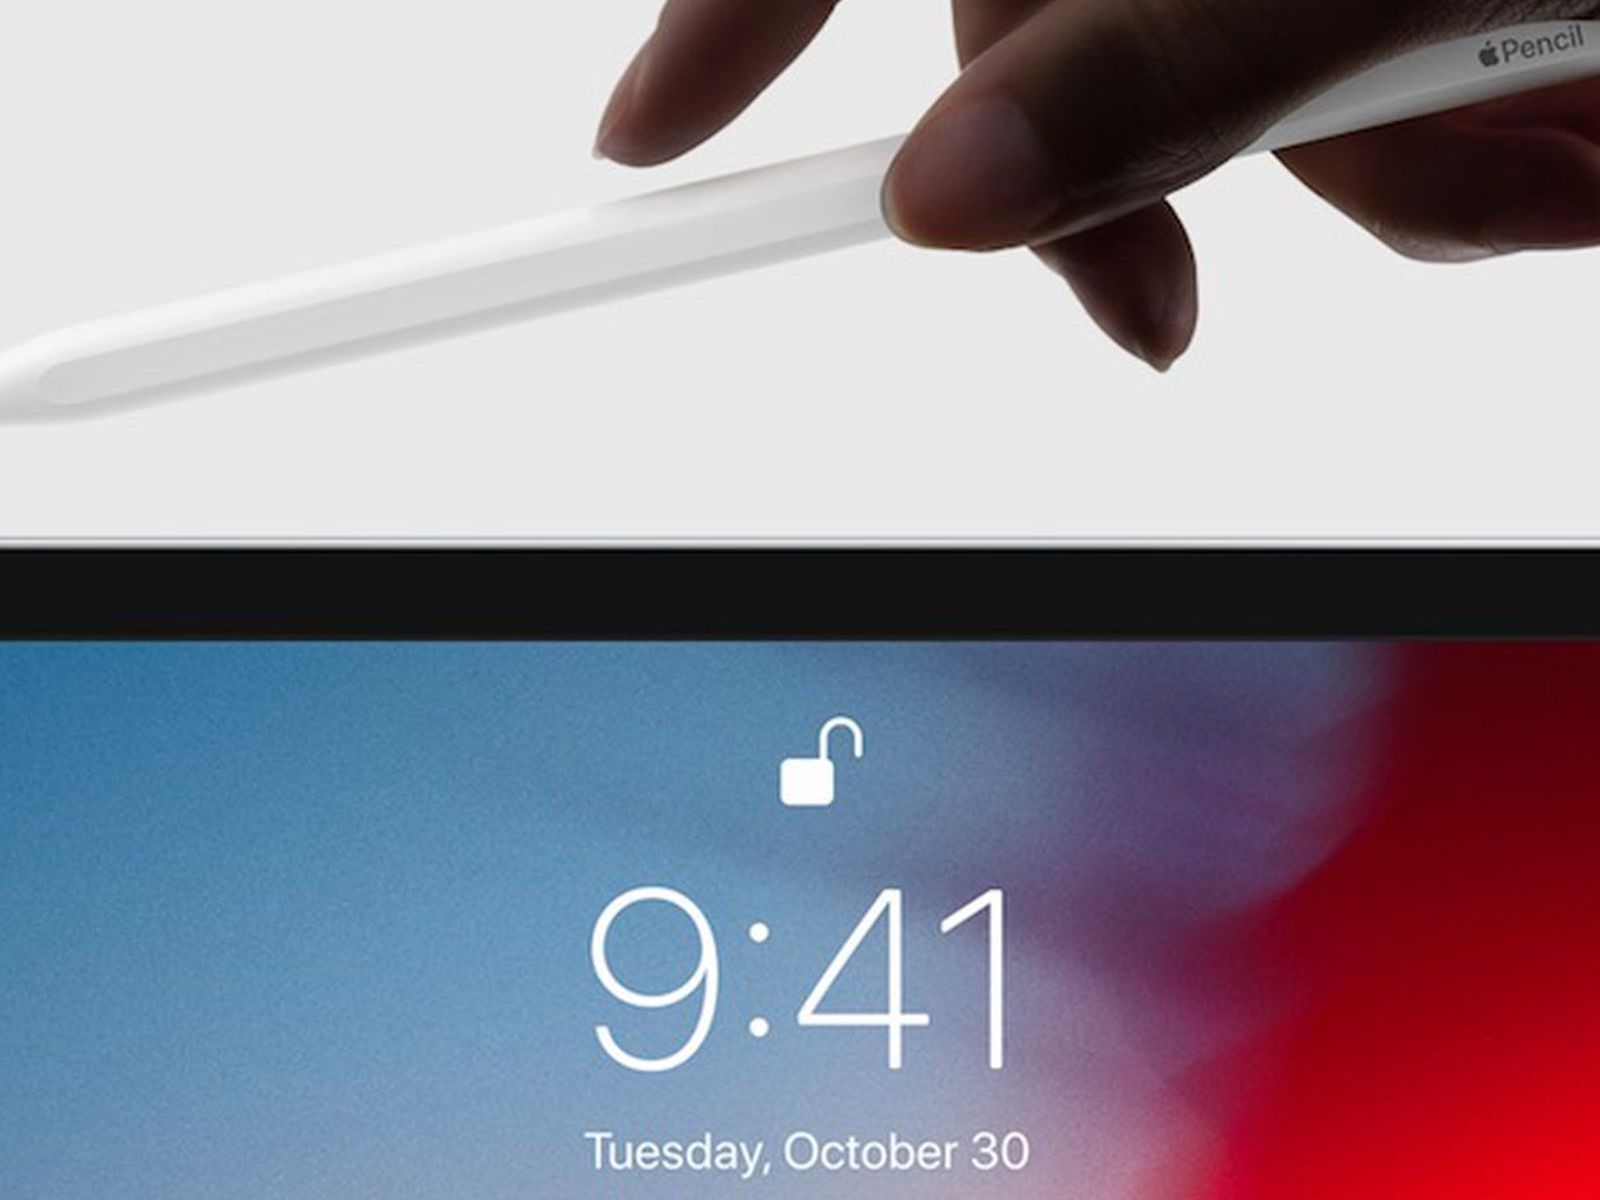 Apple Pencil 3 rumored to include magnetic tip replacement feature -  PhoneArena